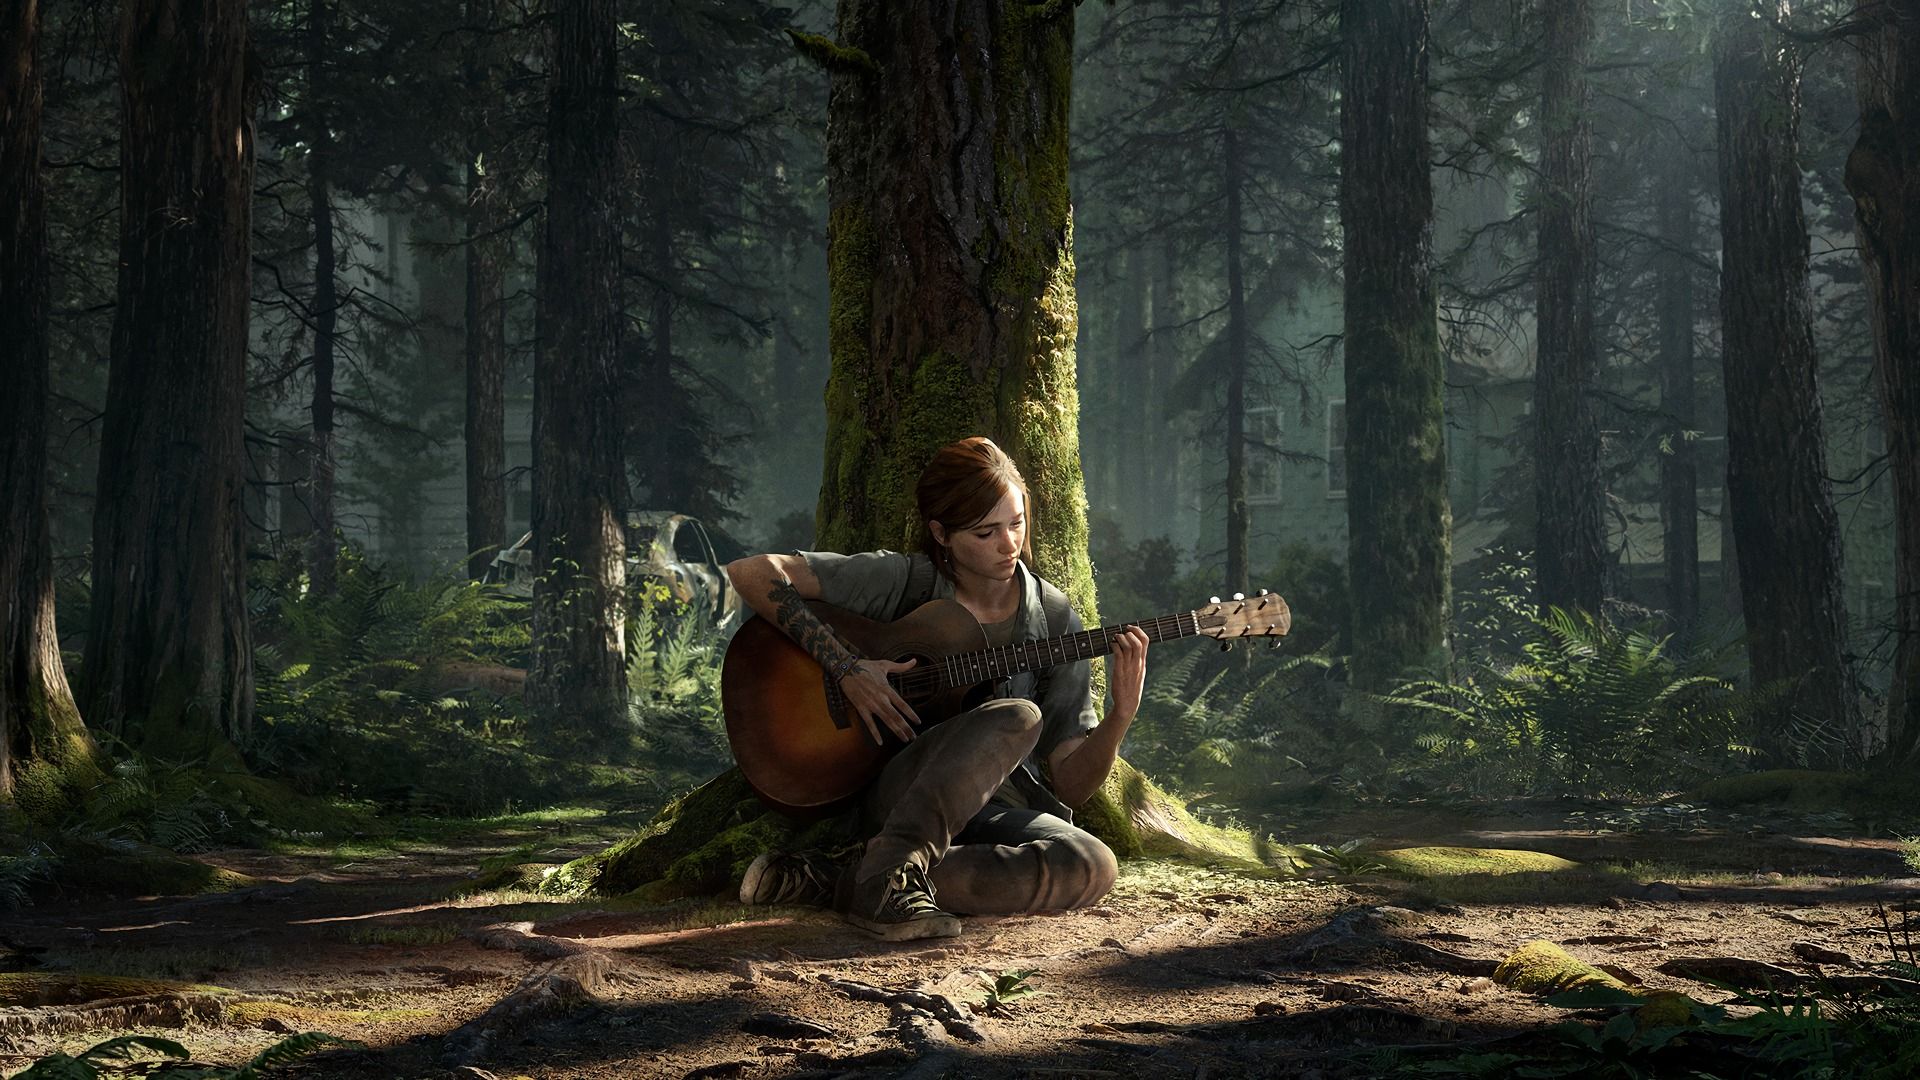 The Last Of Us Fan Gets Epic Leg Sleeve Tattoo Of Ellie, Joel, and More